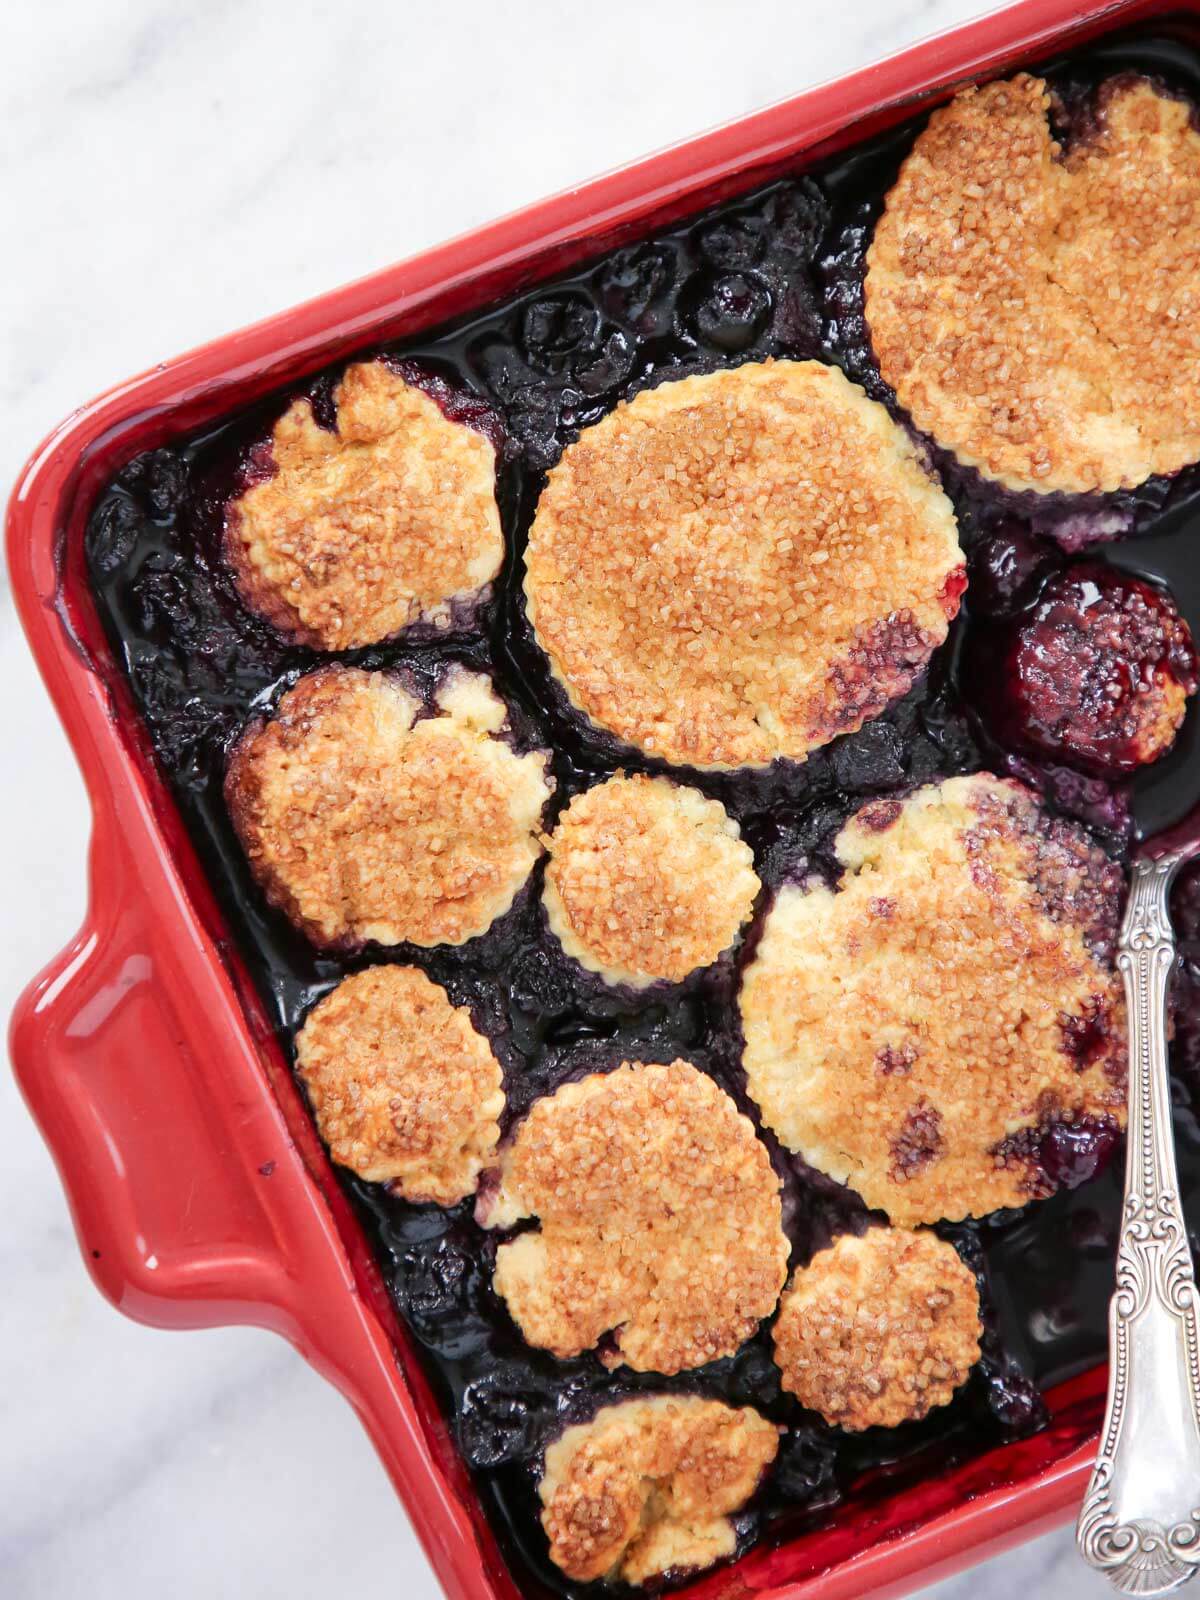 blueberry cobbler unserved in red baking dish.